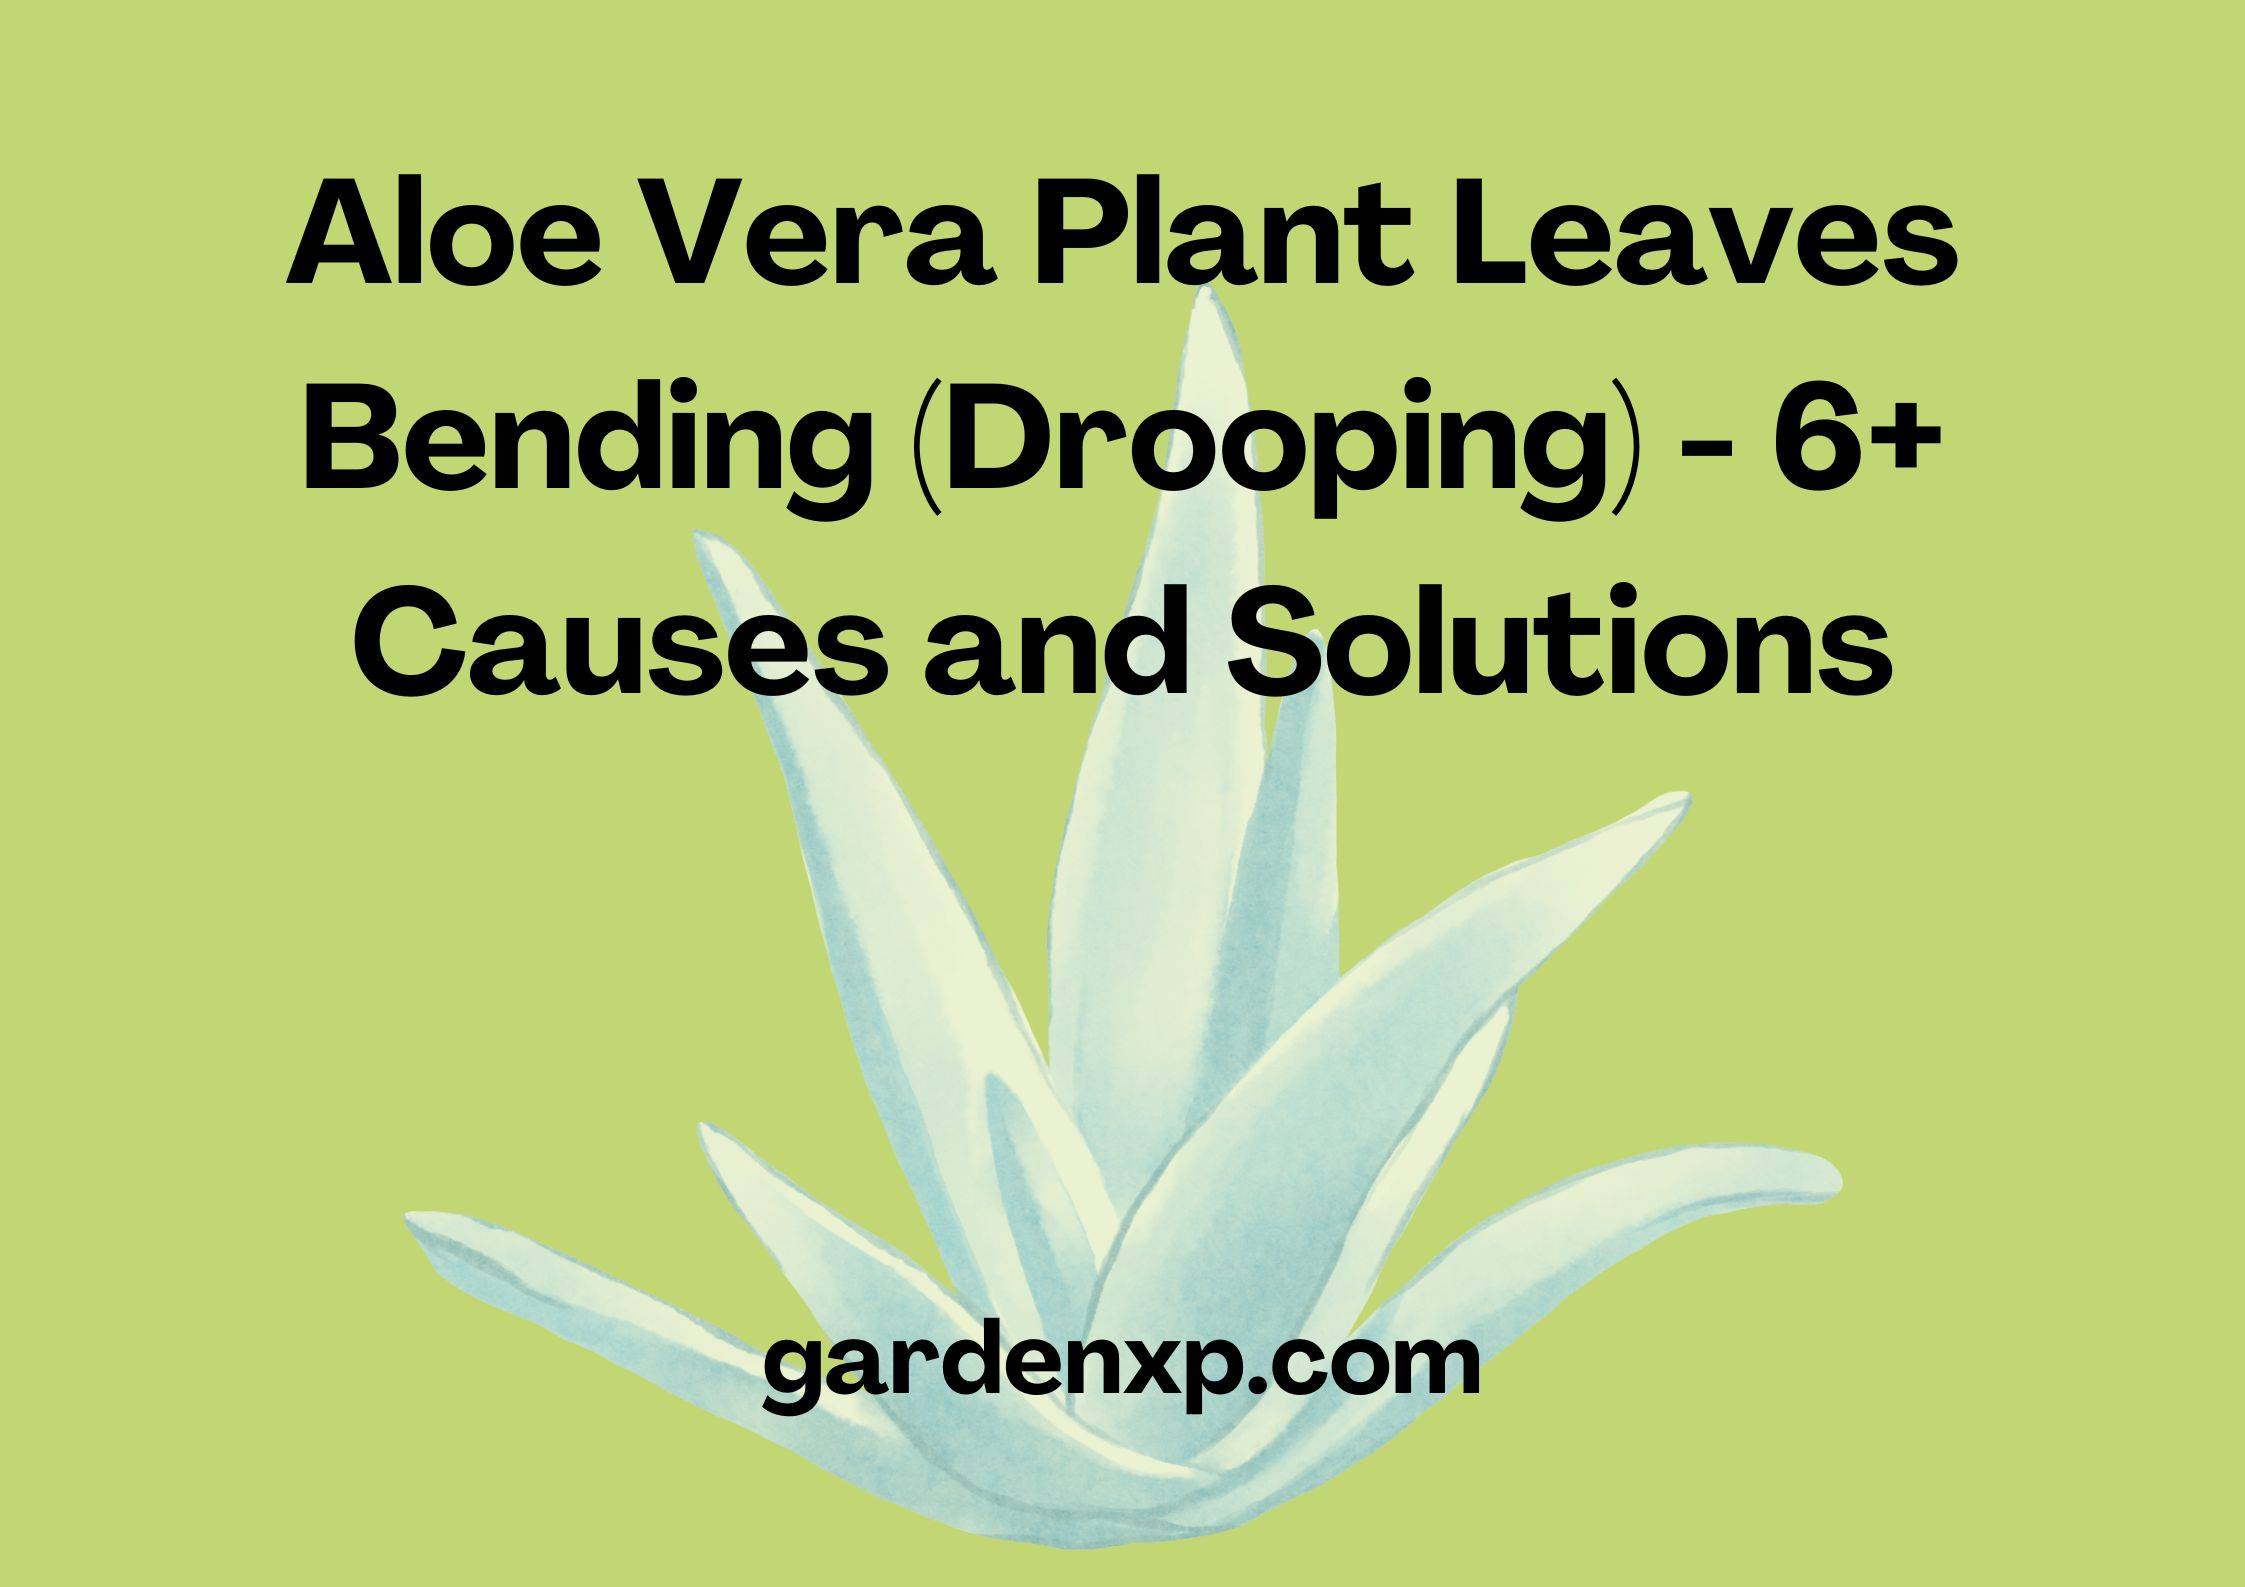 Aloe Vera Plant Leaves Bending (Drooping) - 6+ Causes and Solutions